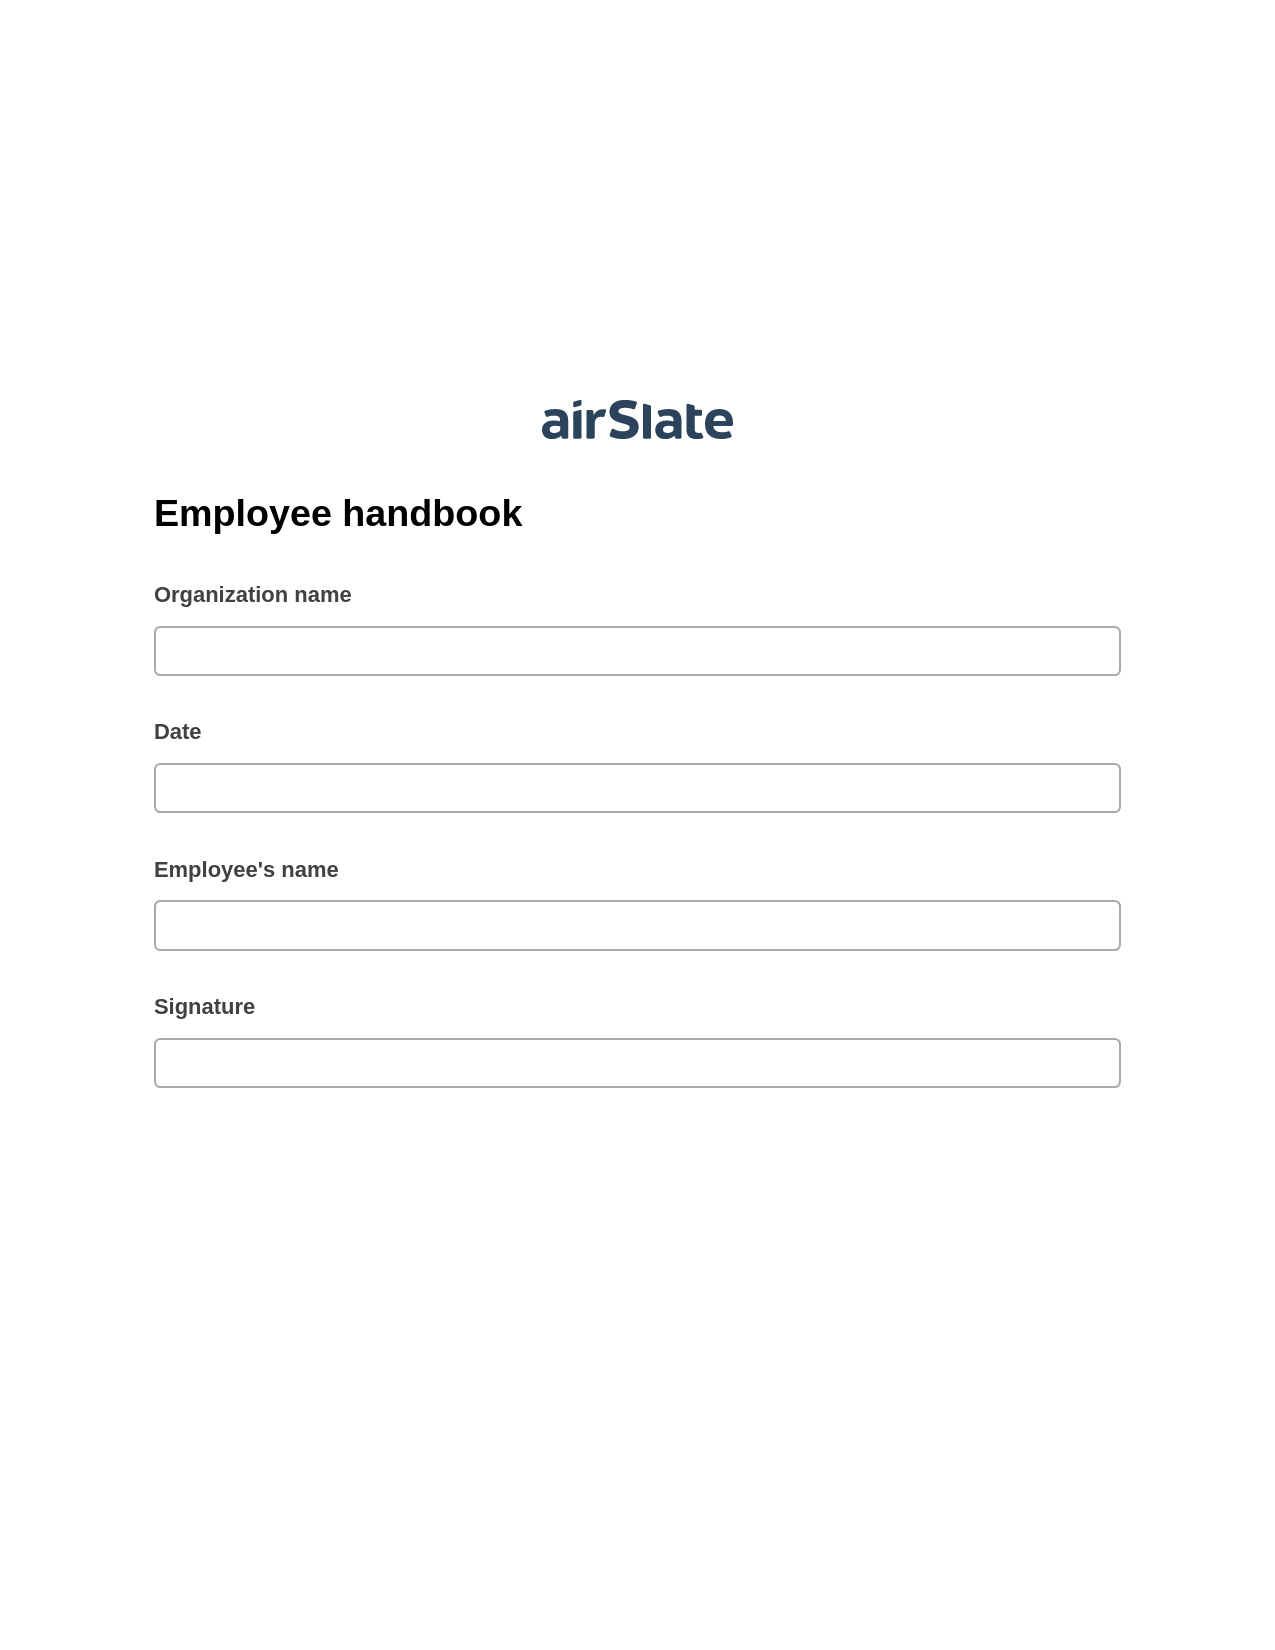 Employee handbook Pre-fill from NetSuite Records Bot, Audit Trail Bot, Export to Salesforce Bot